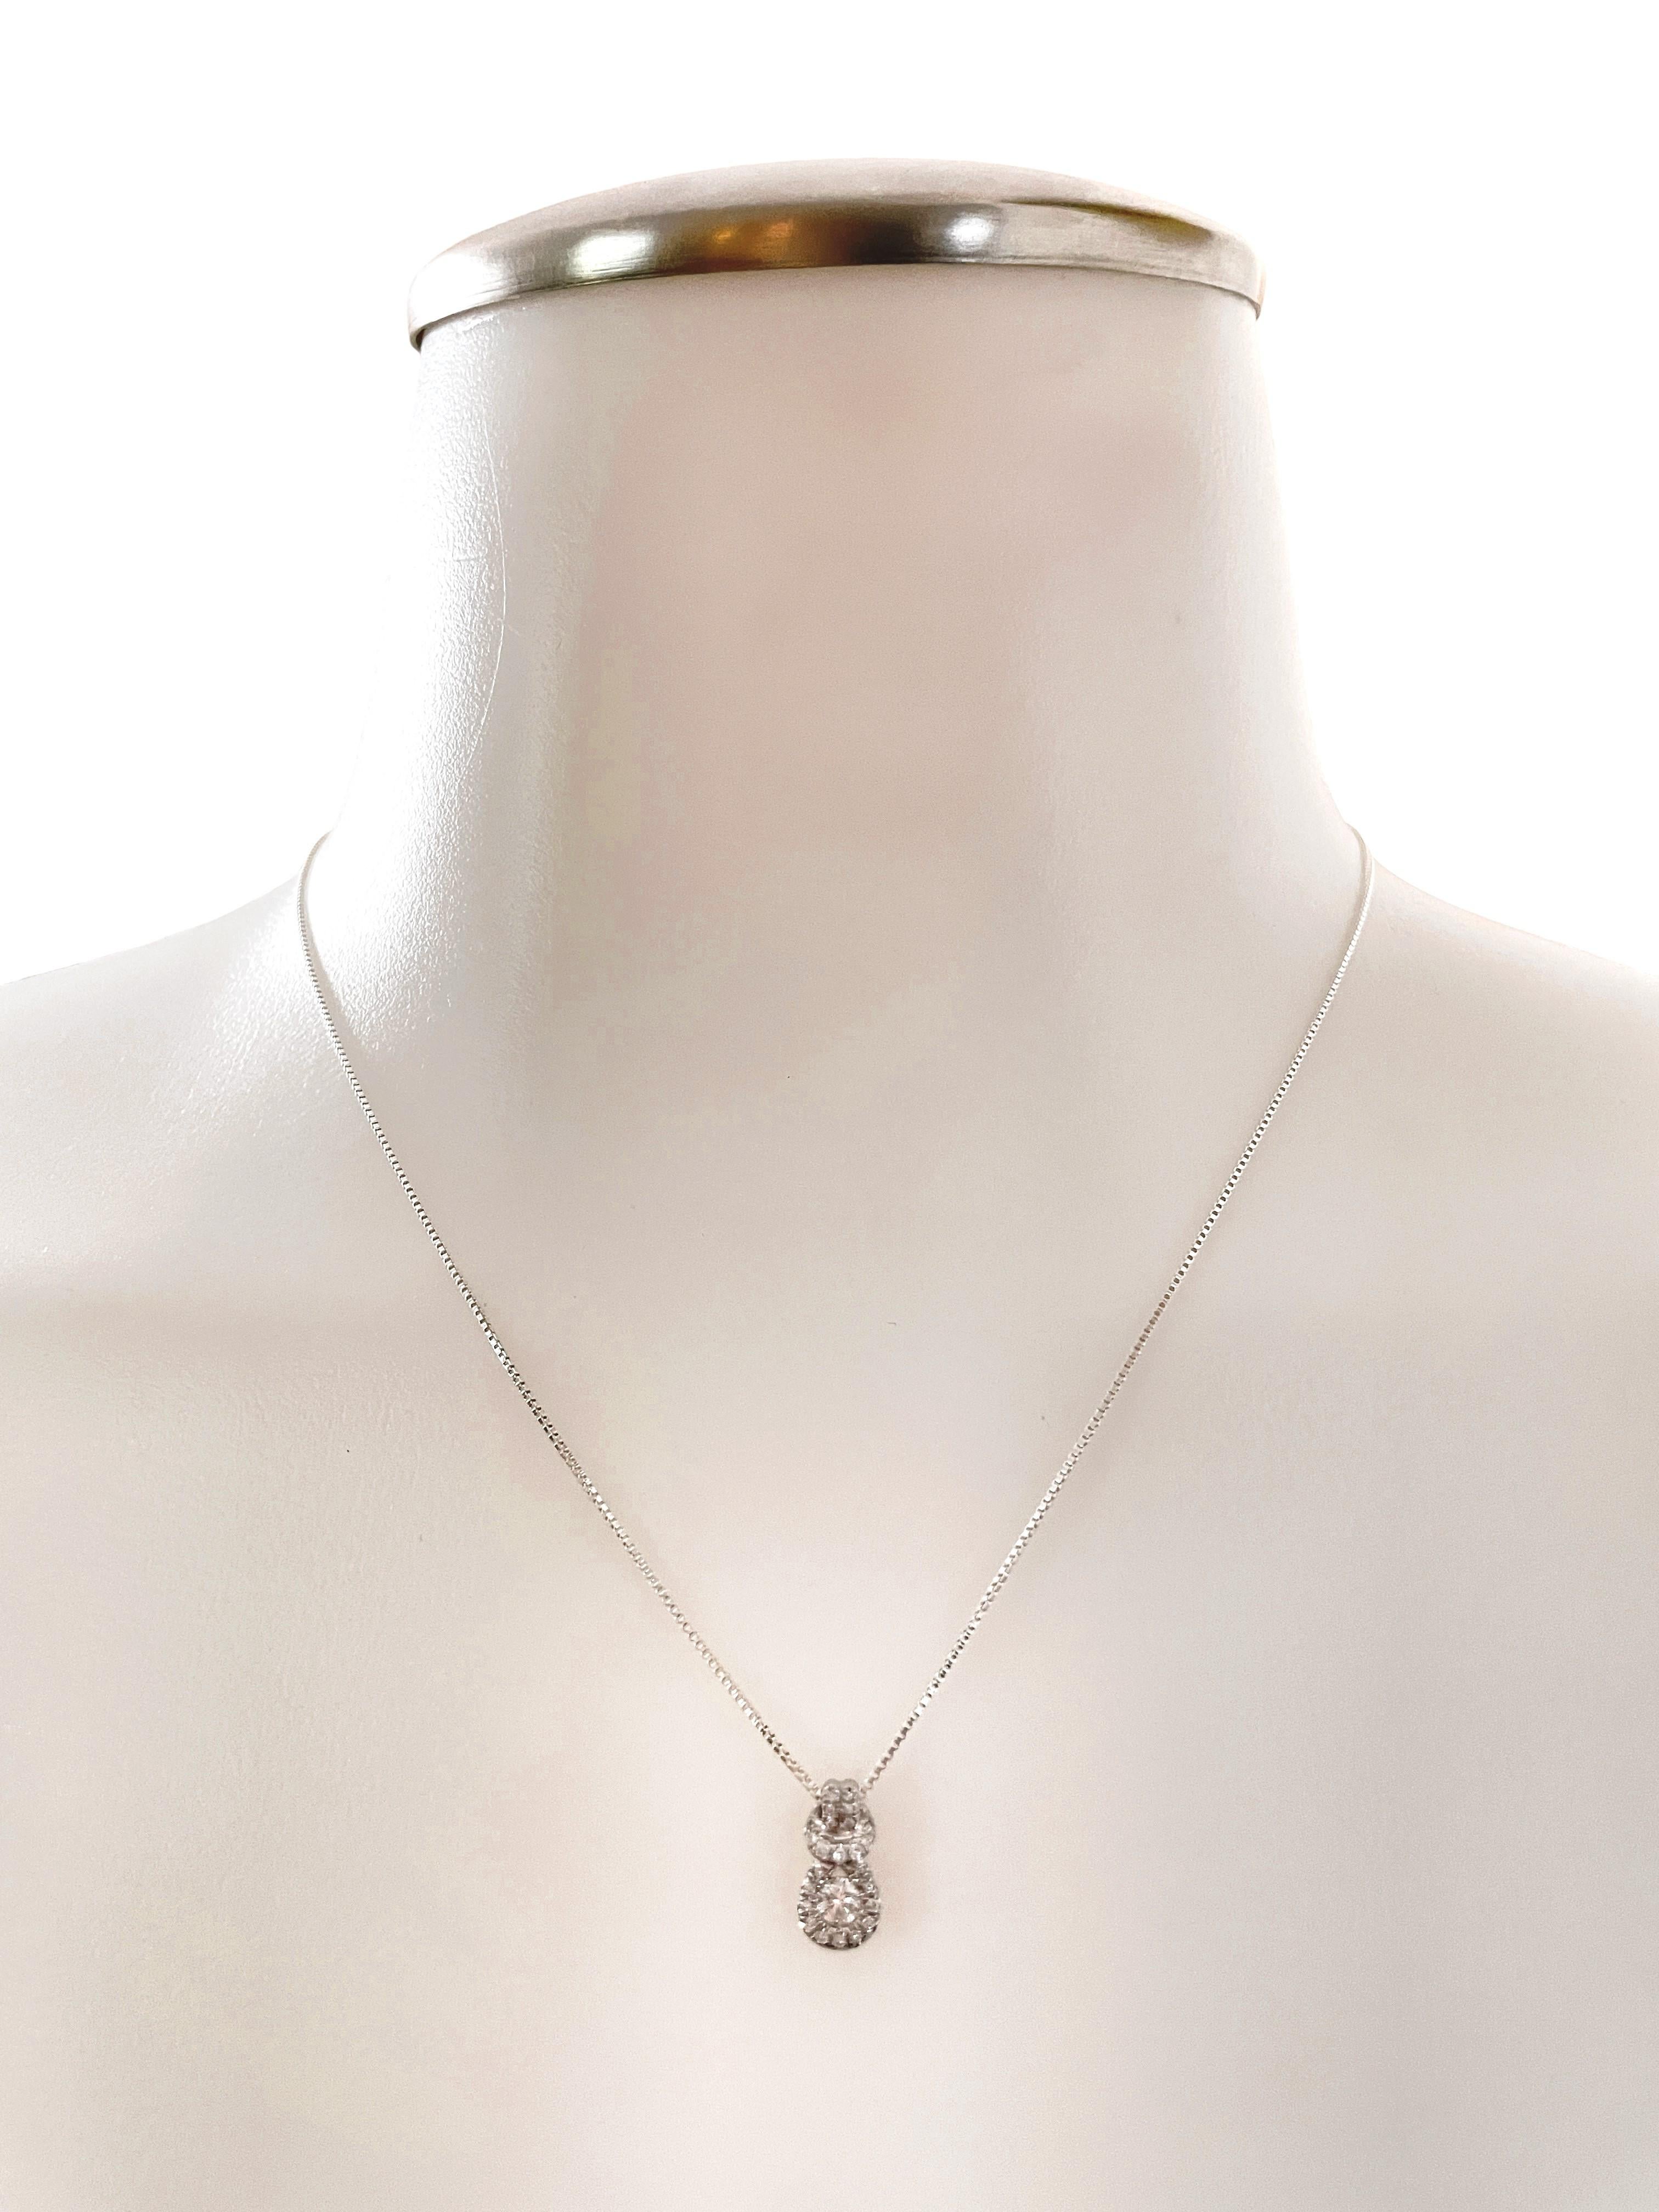 This is a beautiful pre-owned diamond pendant that is in excellent condition.  It is stamped 